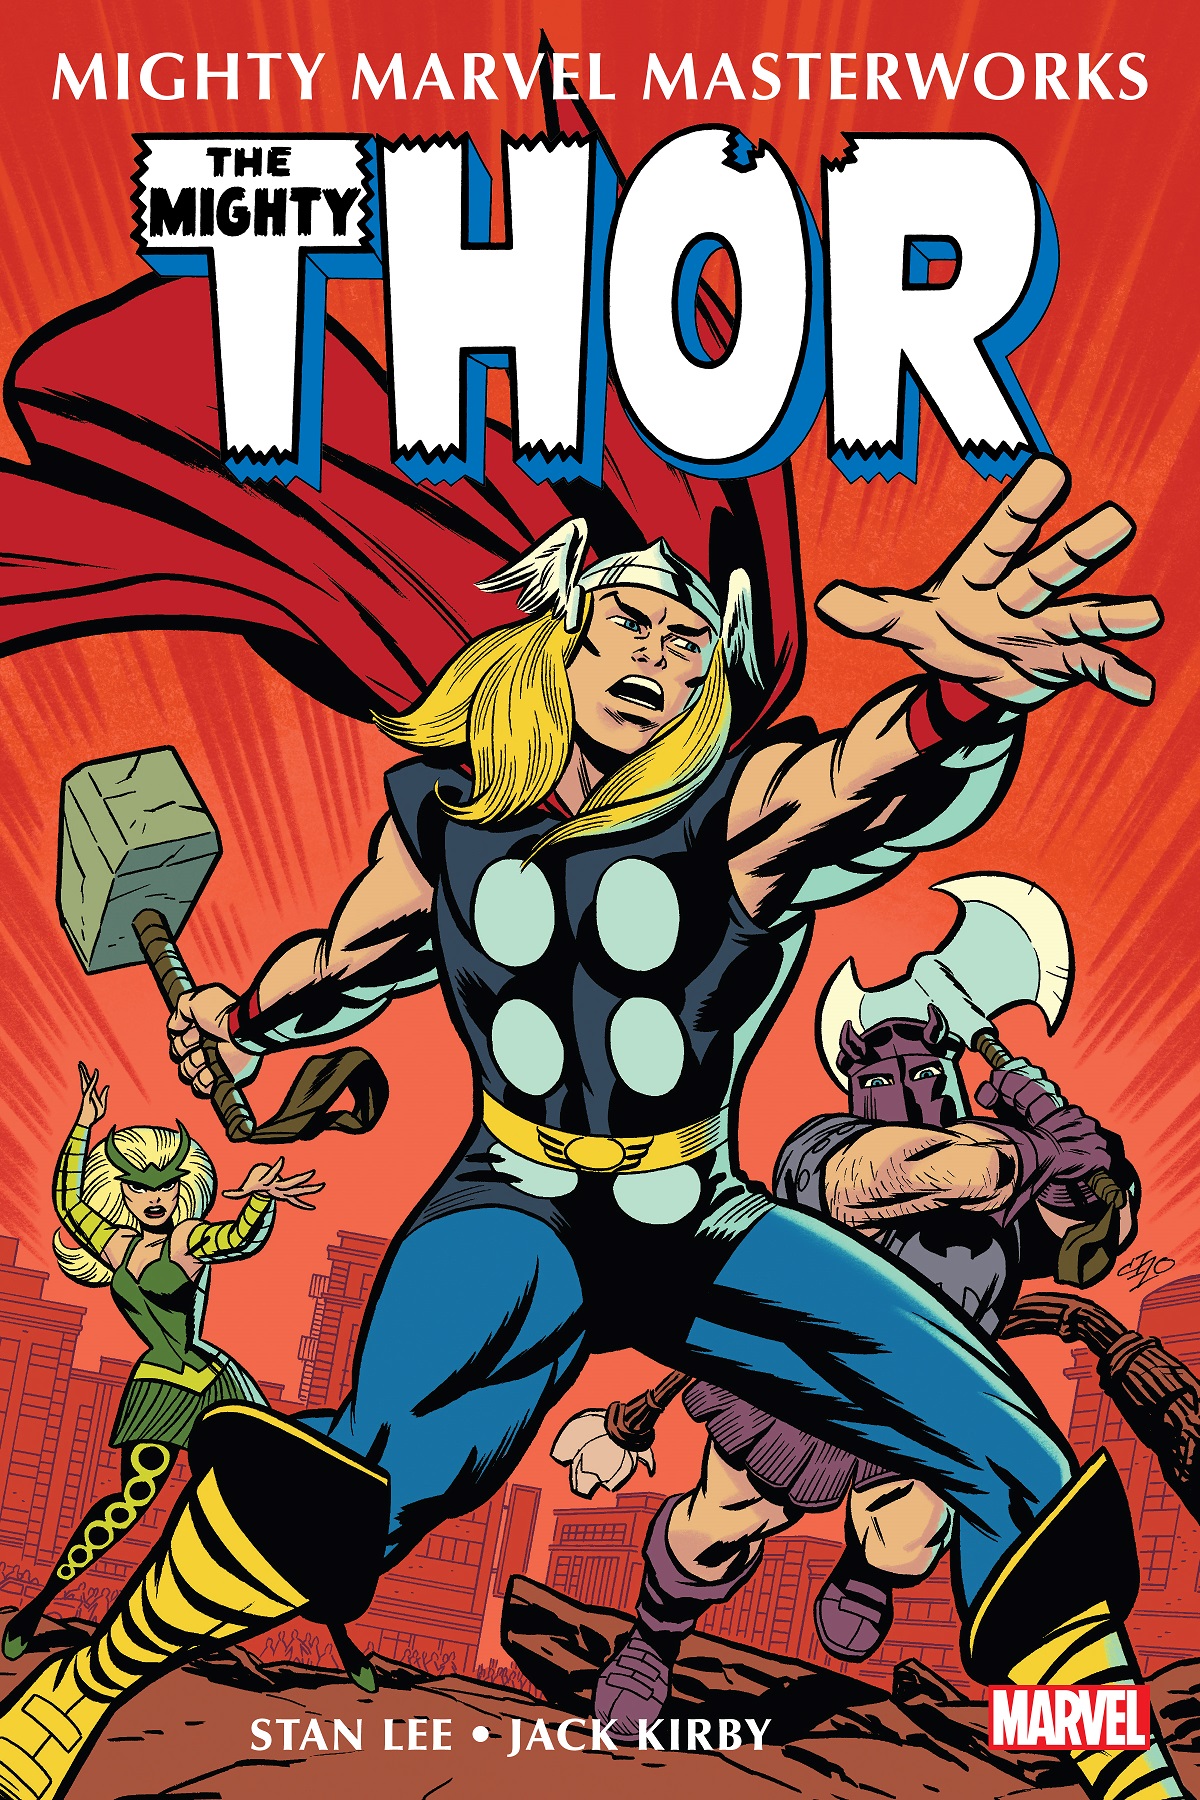 Mighty Marvel Masterworks: The Mighty Thor Vol. 2 - The Invasion Of Asgard (Trade Paperback)